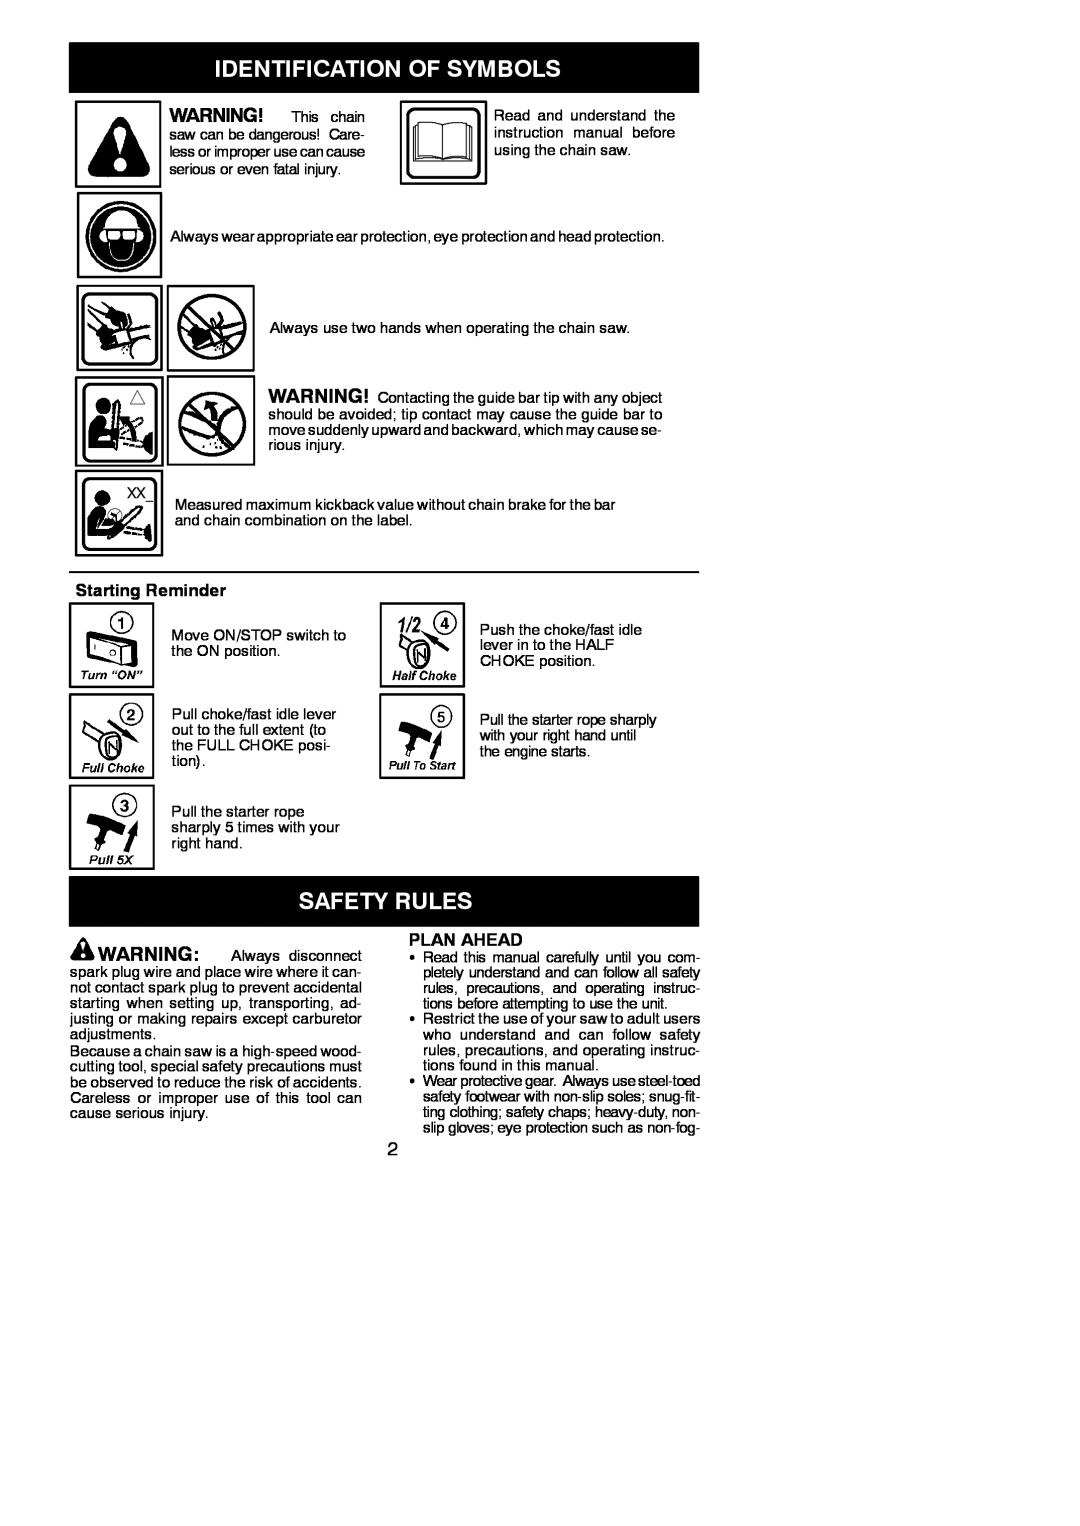 Poulan 952802075 instruction manual Identification Of Symbols, Safety Rules, Starting Reminder, Plan Ahead 